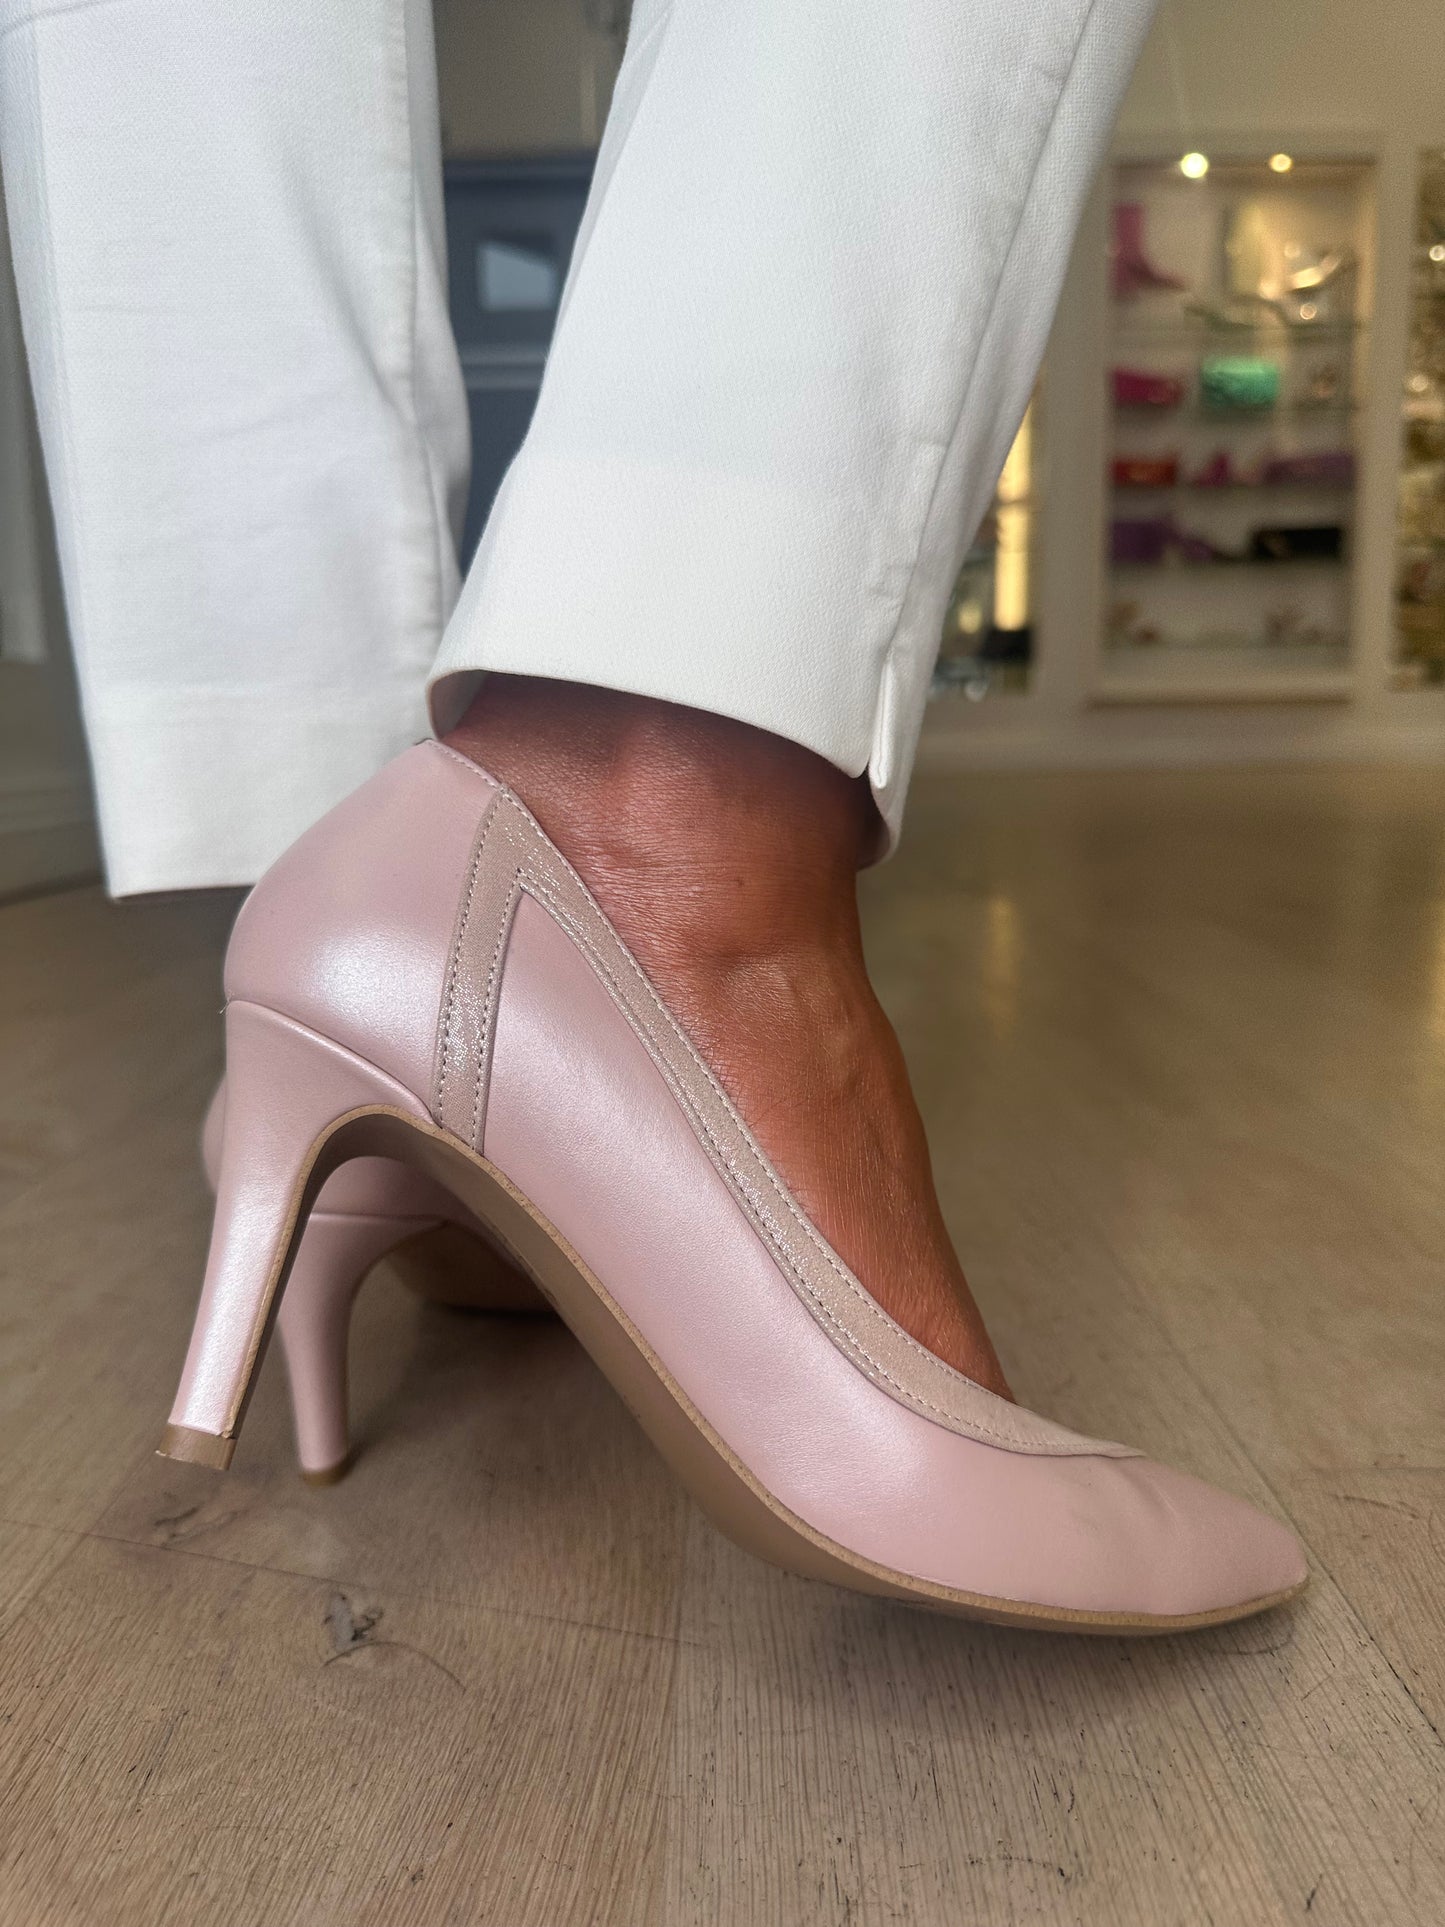 Emis -Blush Pink Pointy Toe Court Shoe With Blush Pink Shimmer Trim